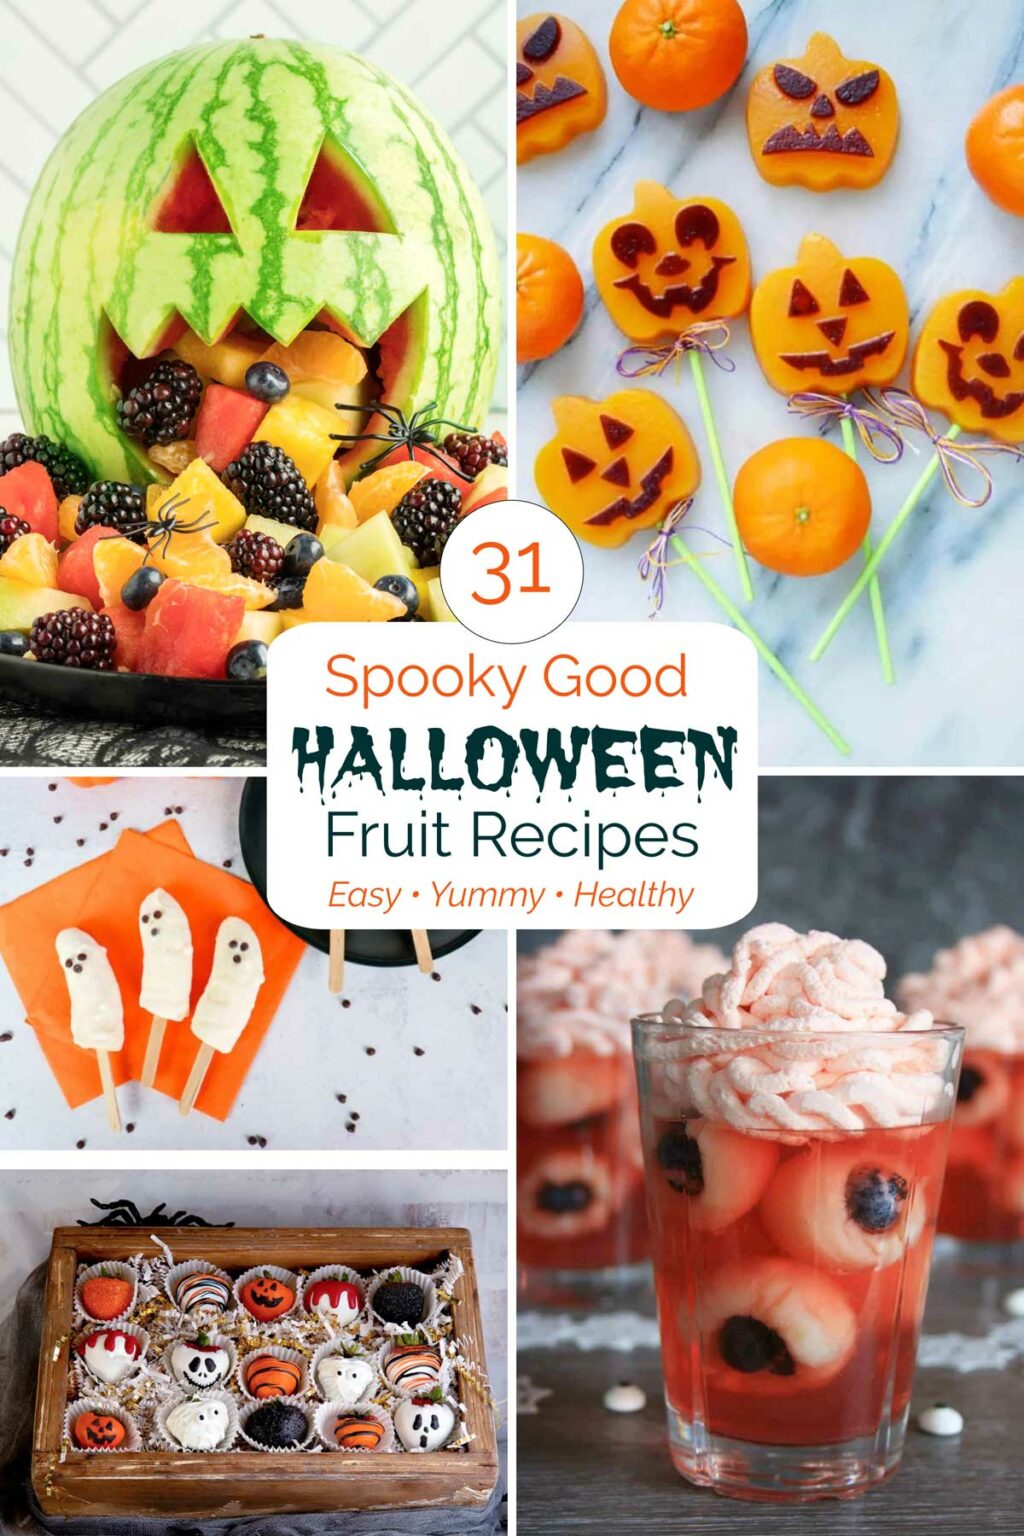 Collage showcasing five recipes with text overlay "31 Spooky Good Halloween Fruit Recipes Easy Yummy Healthy".